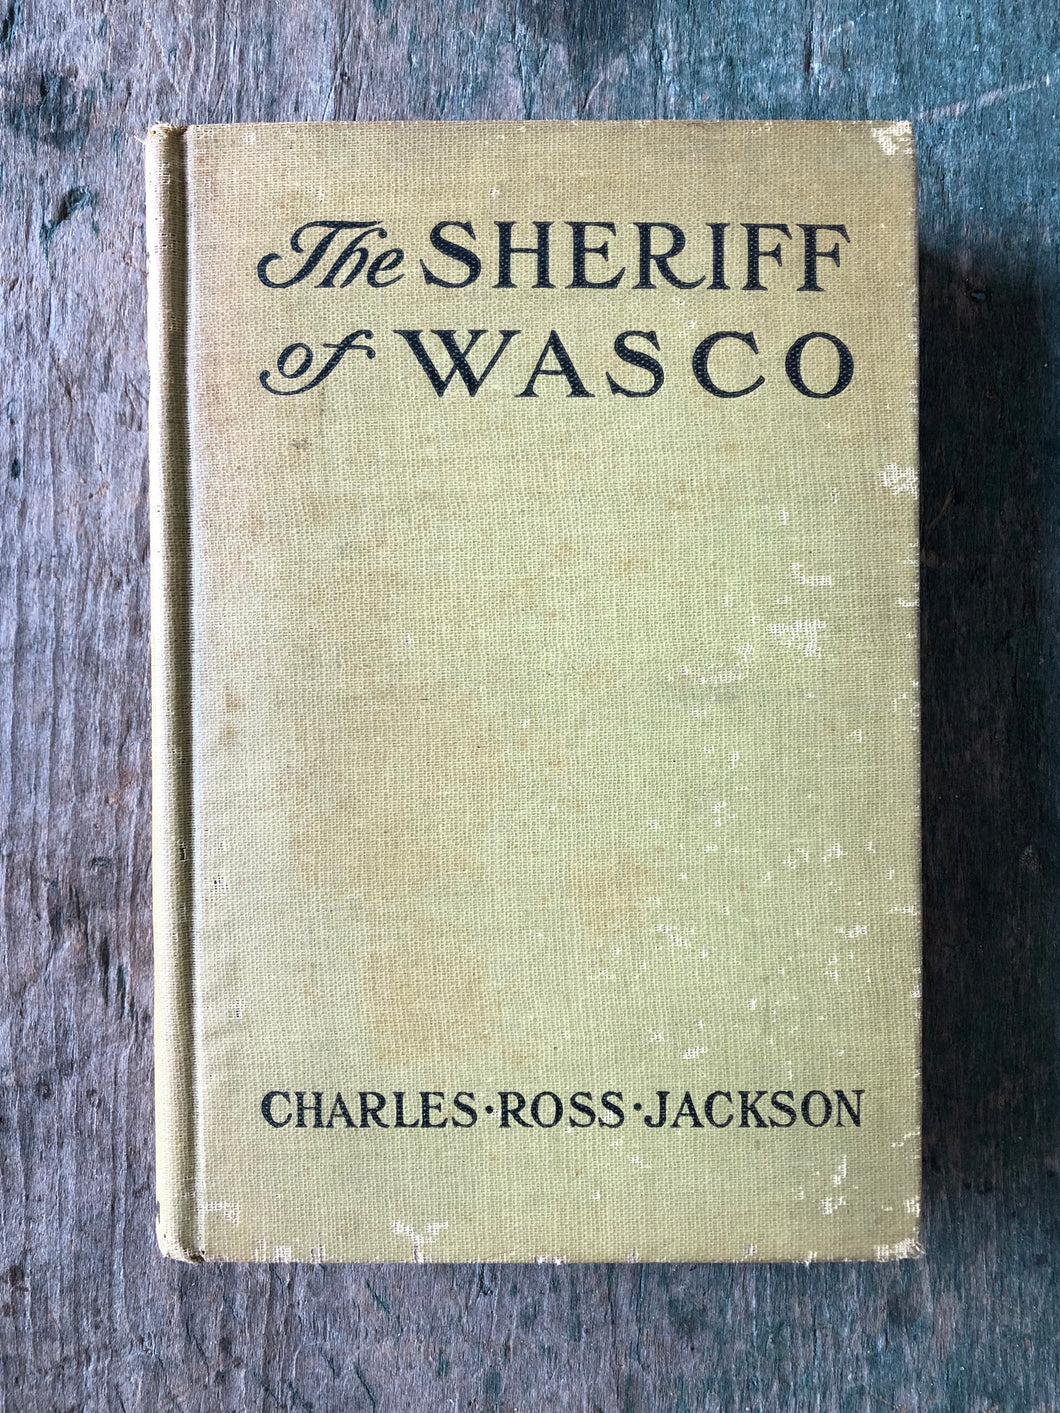 The Sheriff of Wasco by Charles Ross Jackson